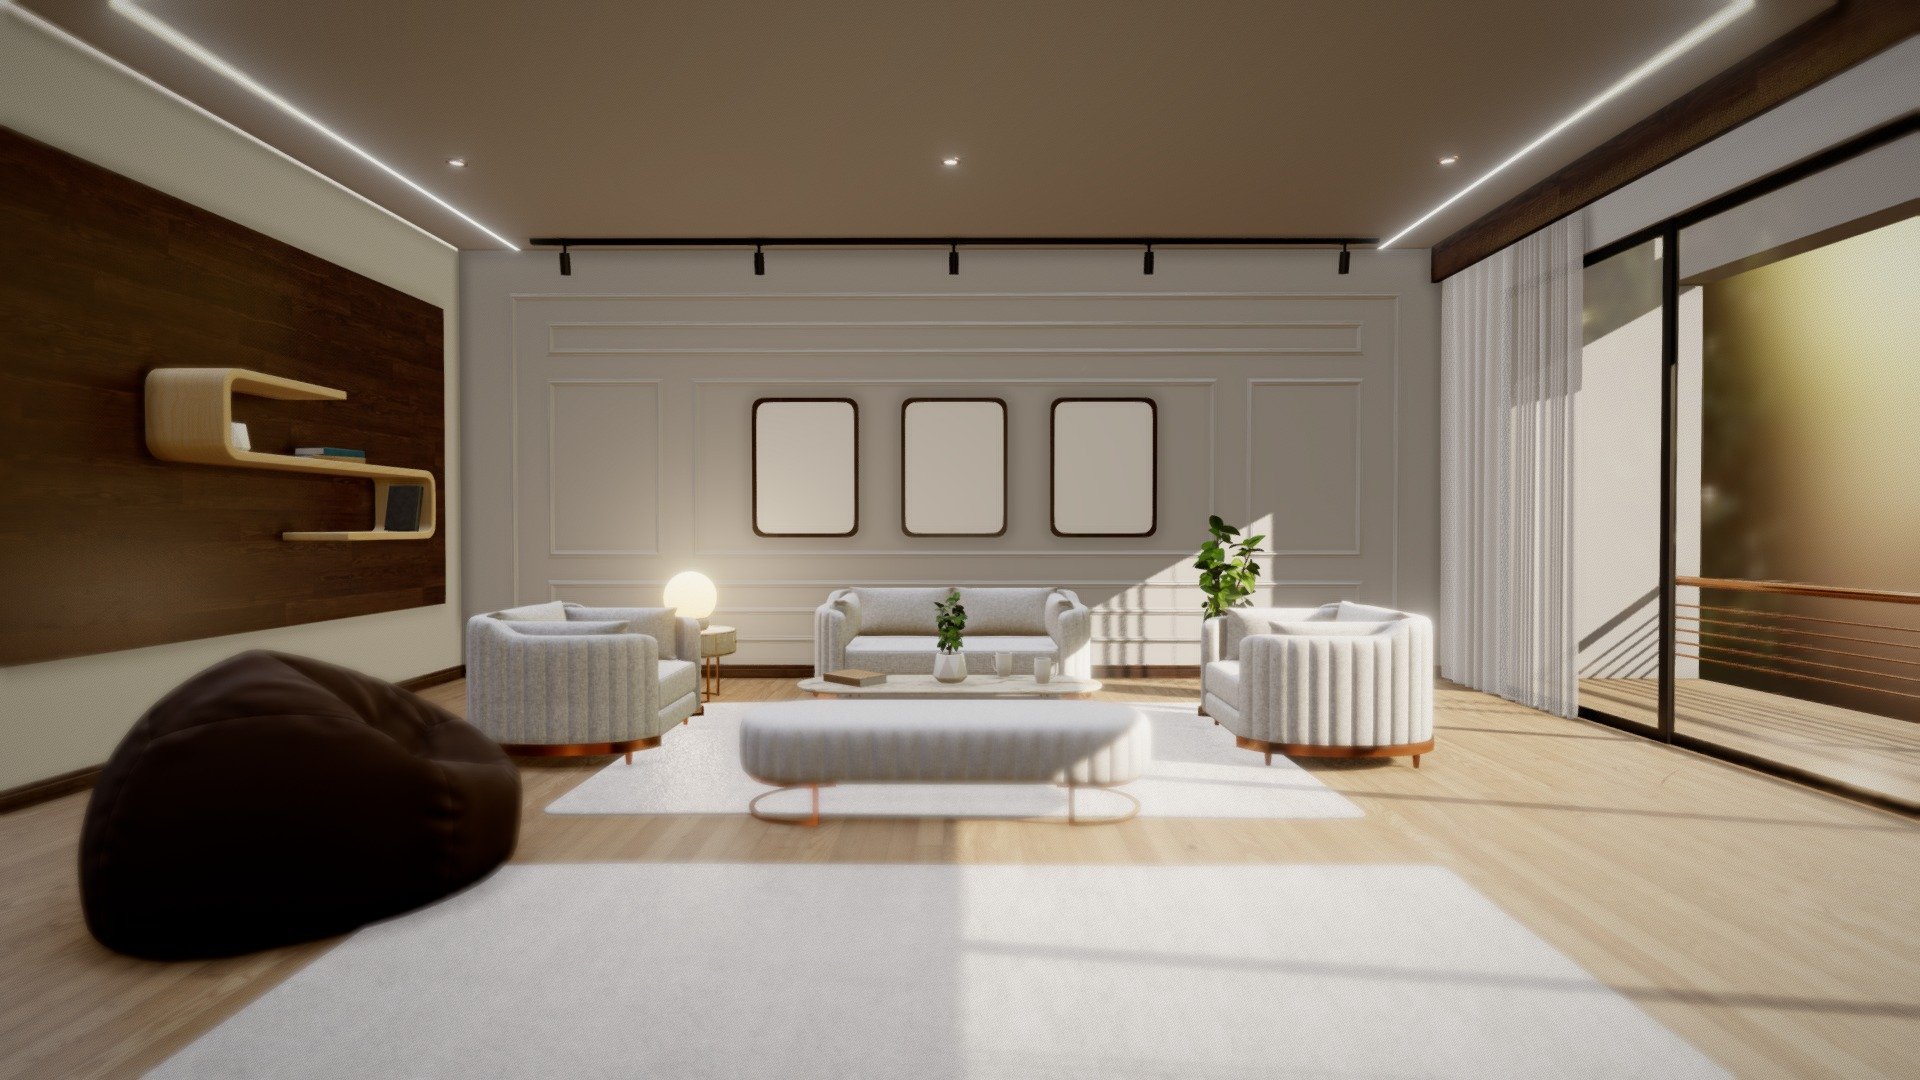 Its a Living Room Low poly 3d model

It has sofa set, Plant, table, carpet, Lights, Door, TV, Balcony, Wall Design, Painting, Lamp, Bean bag, wall showcase, wall, Designs, Celling Lights.

Great for any interior projects OR AR/VR, Project.

Feel free to comment for any query or suggestions 3d model